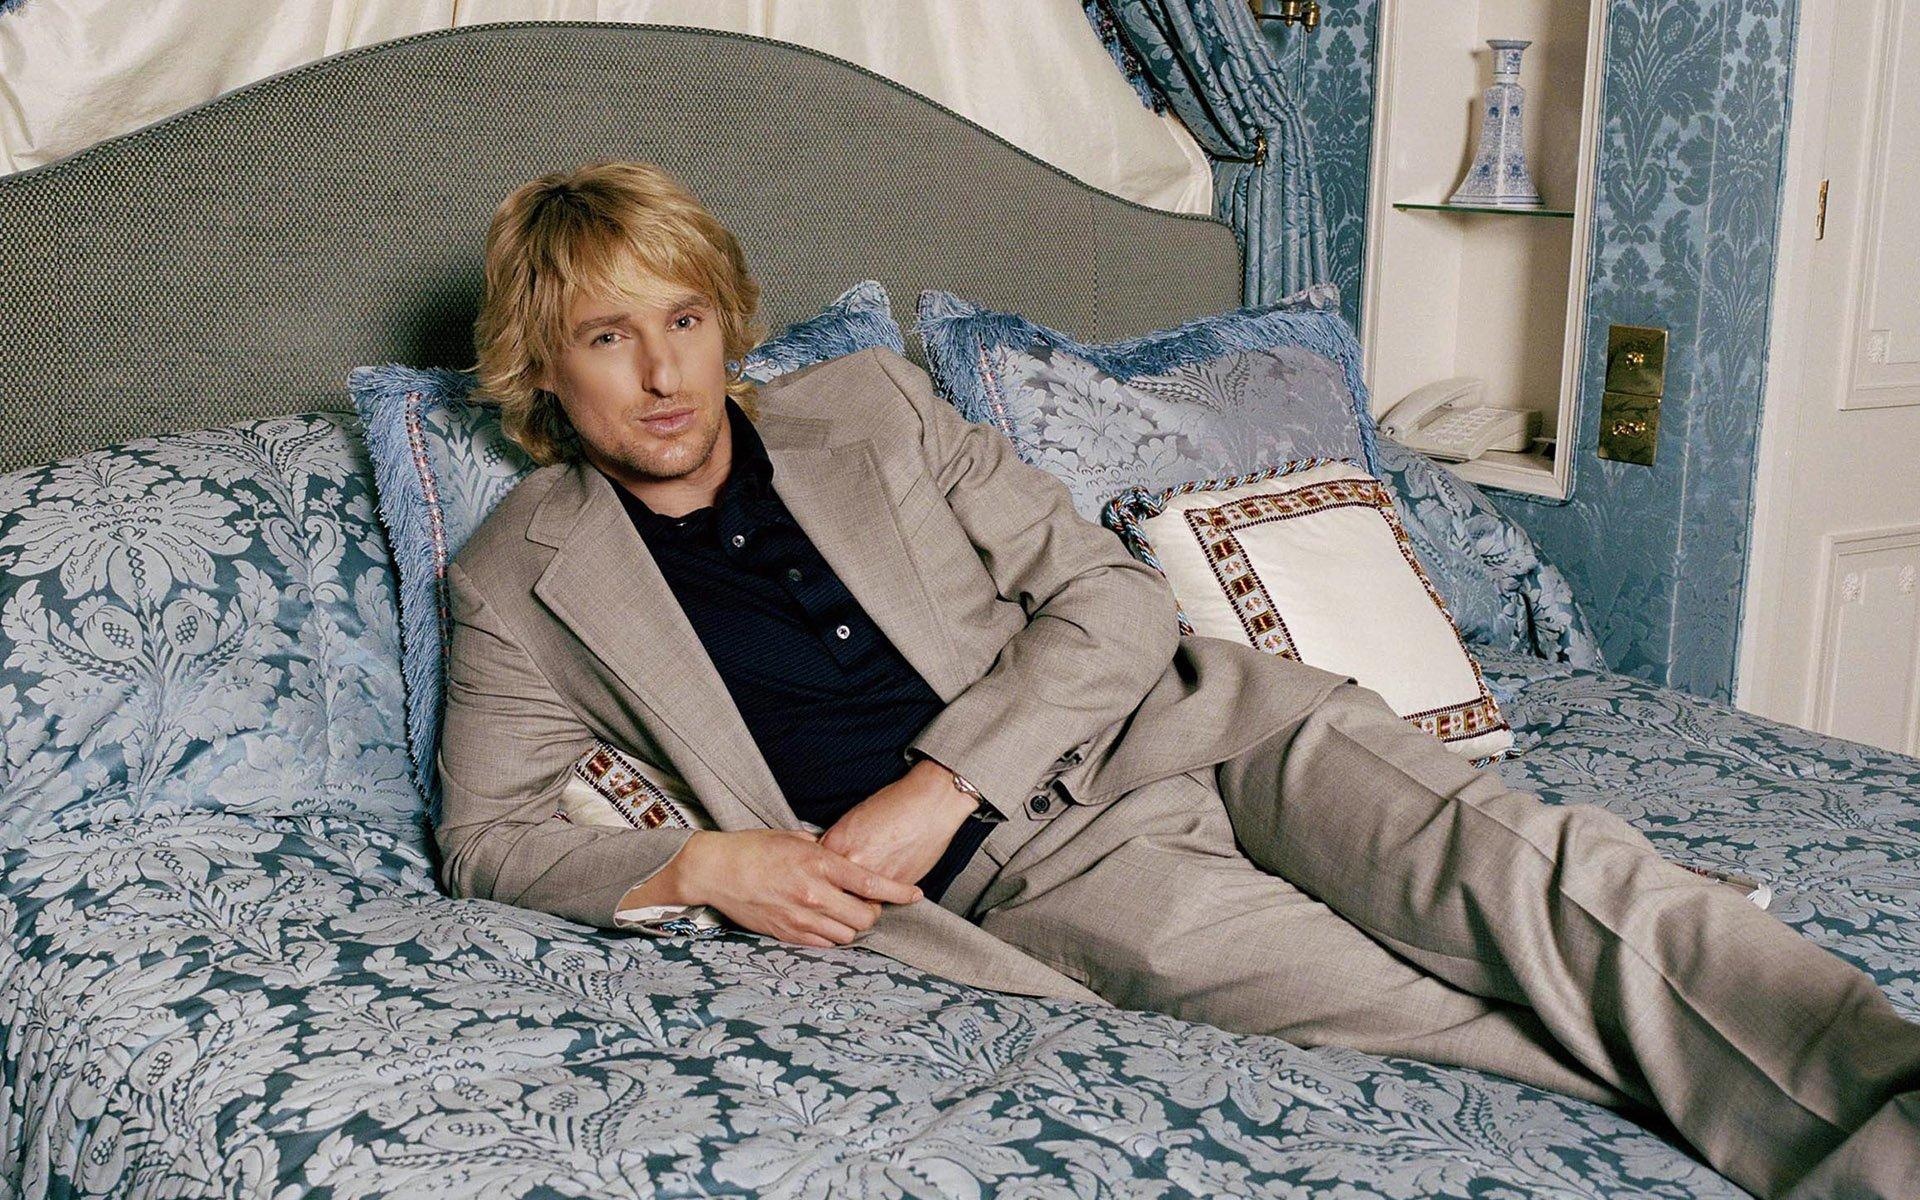 Owen Wilson: An American actor and filmmaker, Rose to fame playing Dignan in the 1996 movie Bottle Rocket. 1920x1200 HD Background.